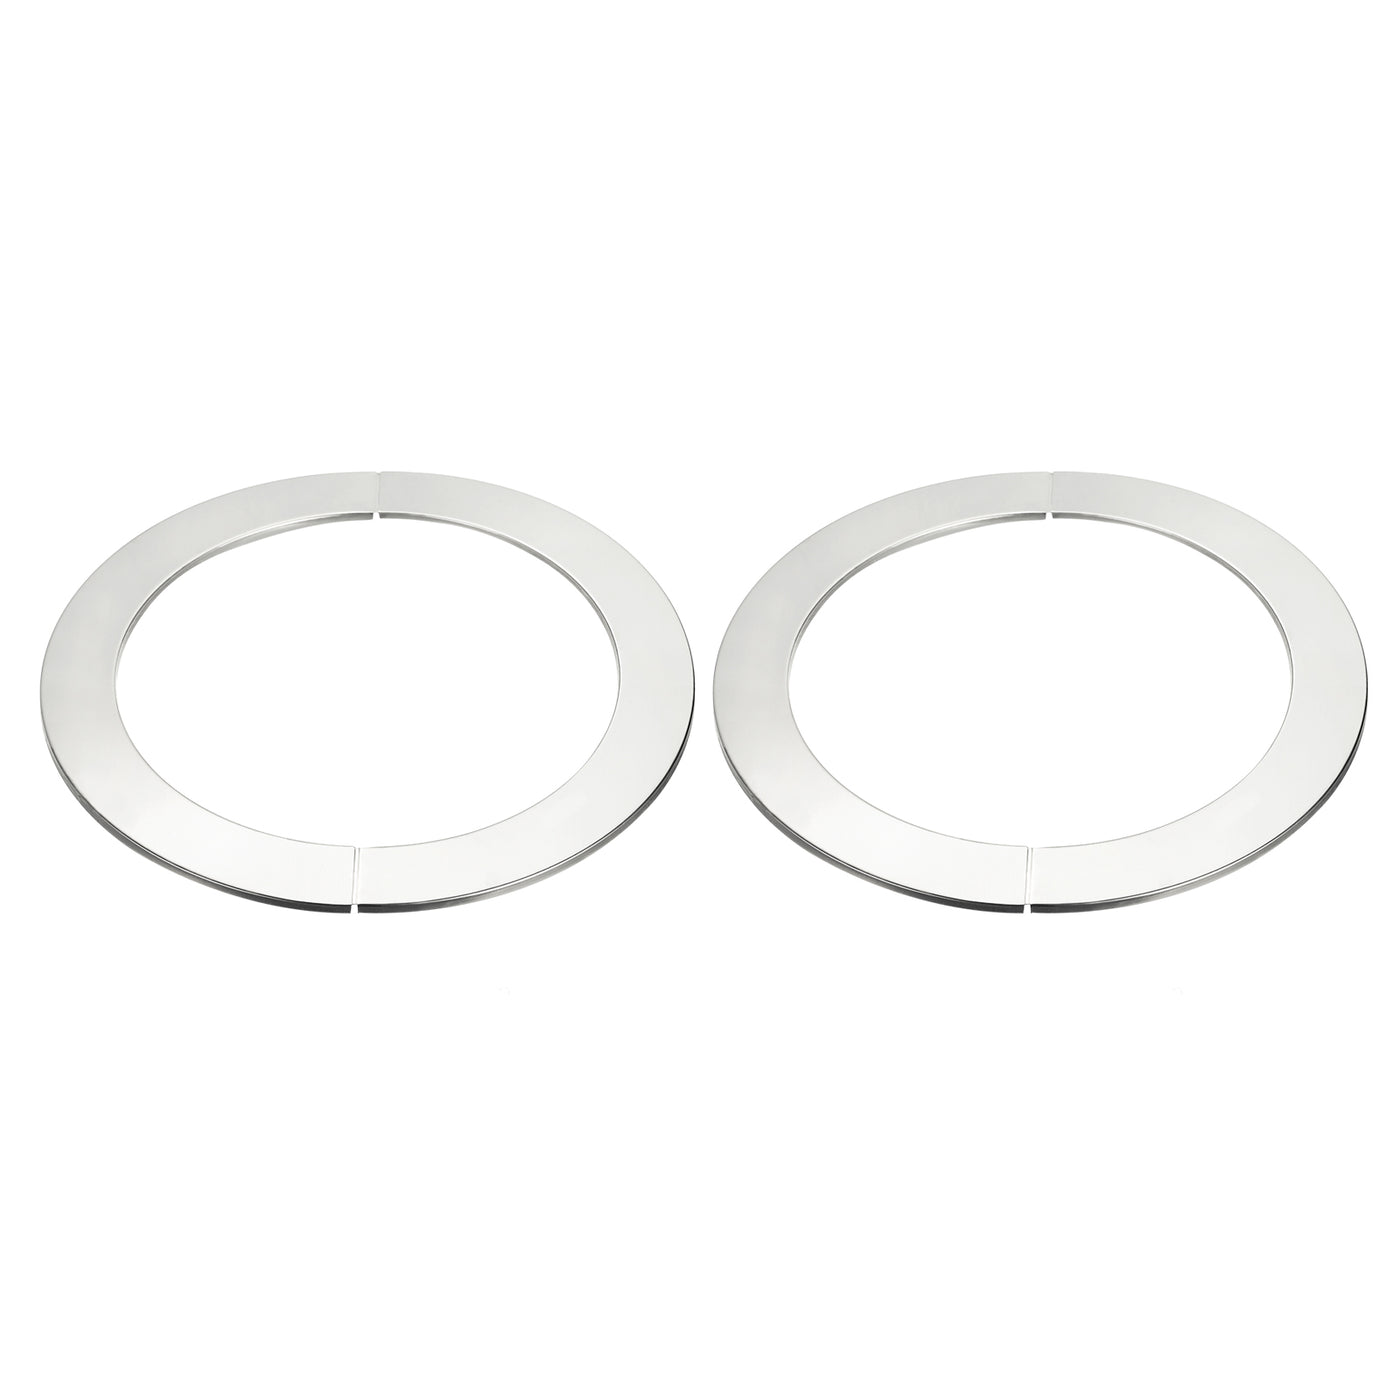 Uxcell Uxcell Wall Split Flange, 201 Stainless Steel Round Escutcheon Plate for 171mm Diameter Pipe 2Pcs